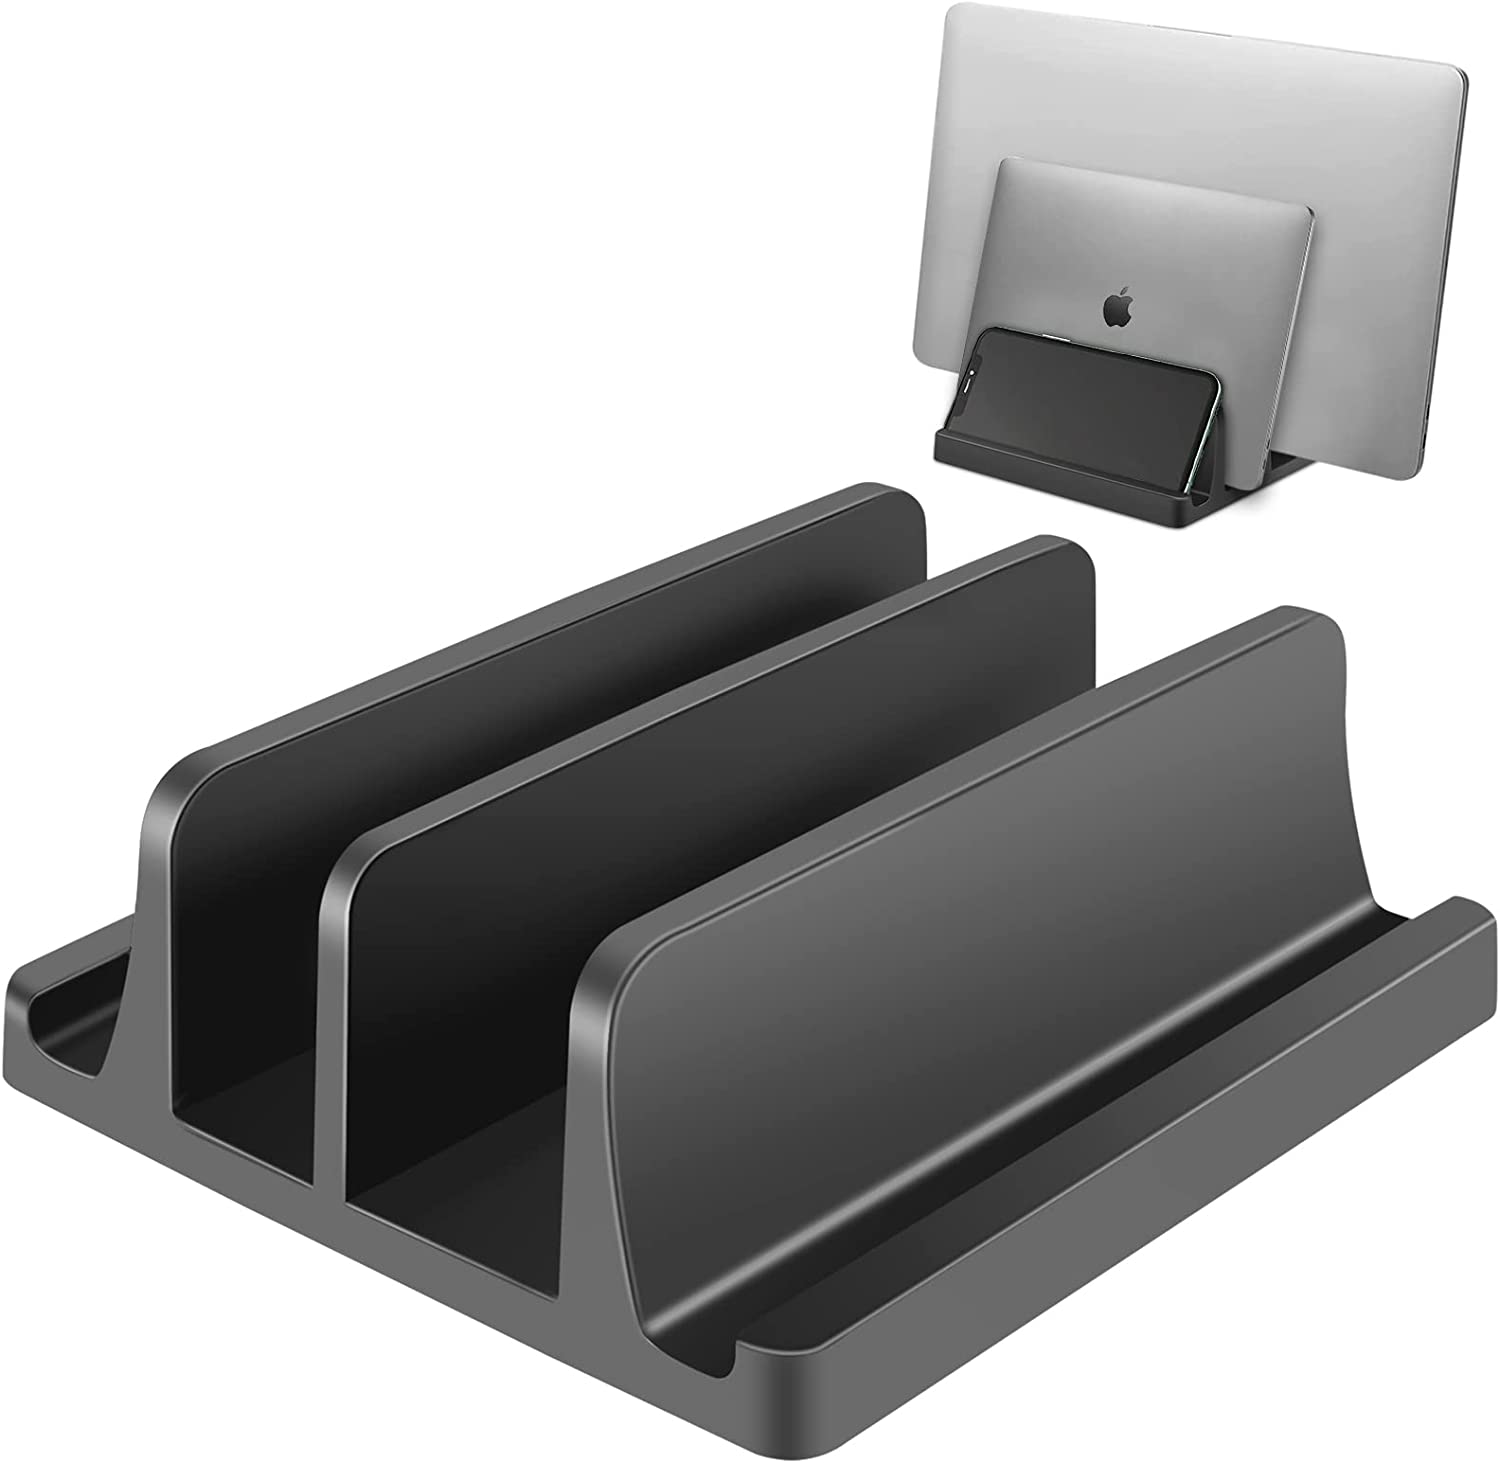 avakot Vertical Laptop Stand, 2-Slot Vertical Laptop Stand Made of Premium ABS Plastics, Designing for Desk Space-Saving, Fits All MacBook/Surface/Samsung/HP/Chrome Book/iPad/iPhone | Black